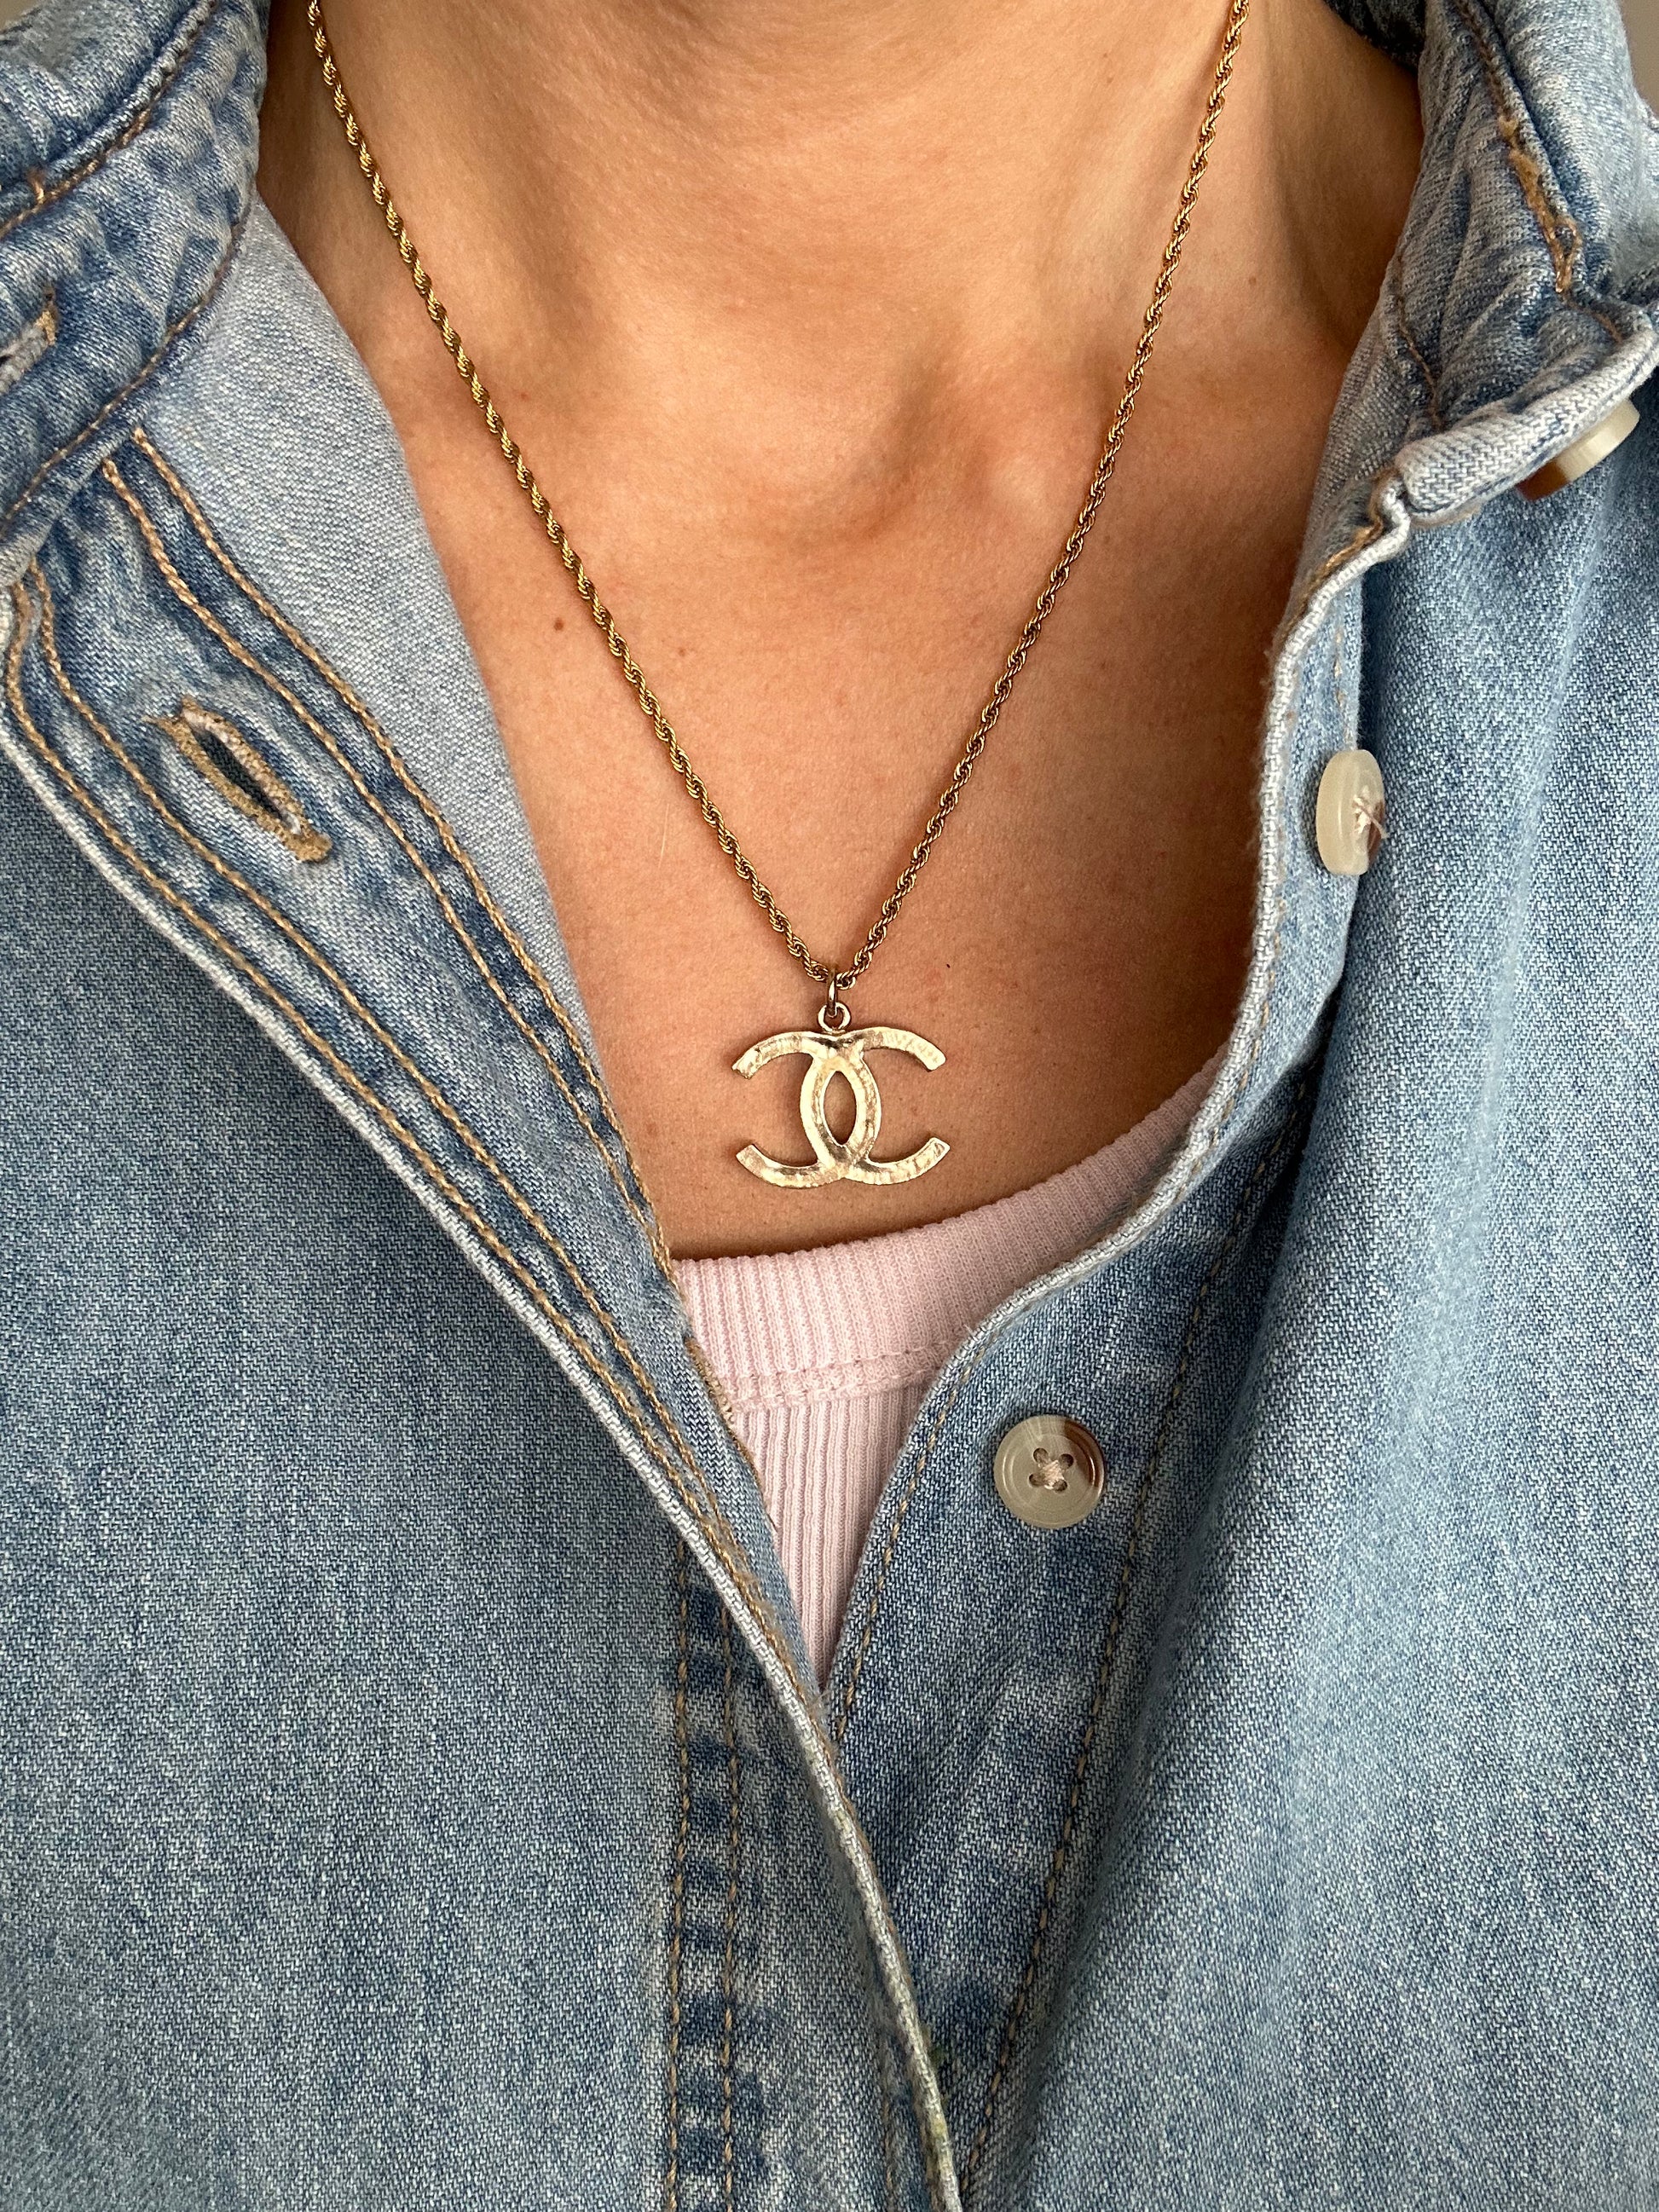 authentic vintage chanel jewelry necklace